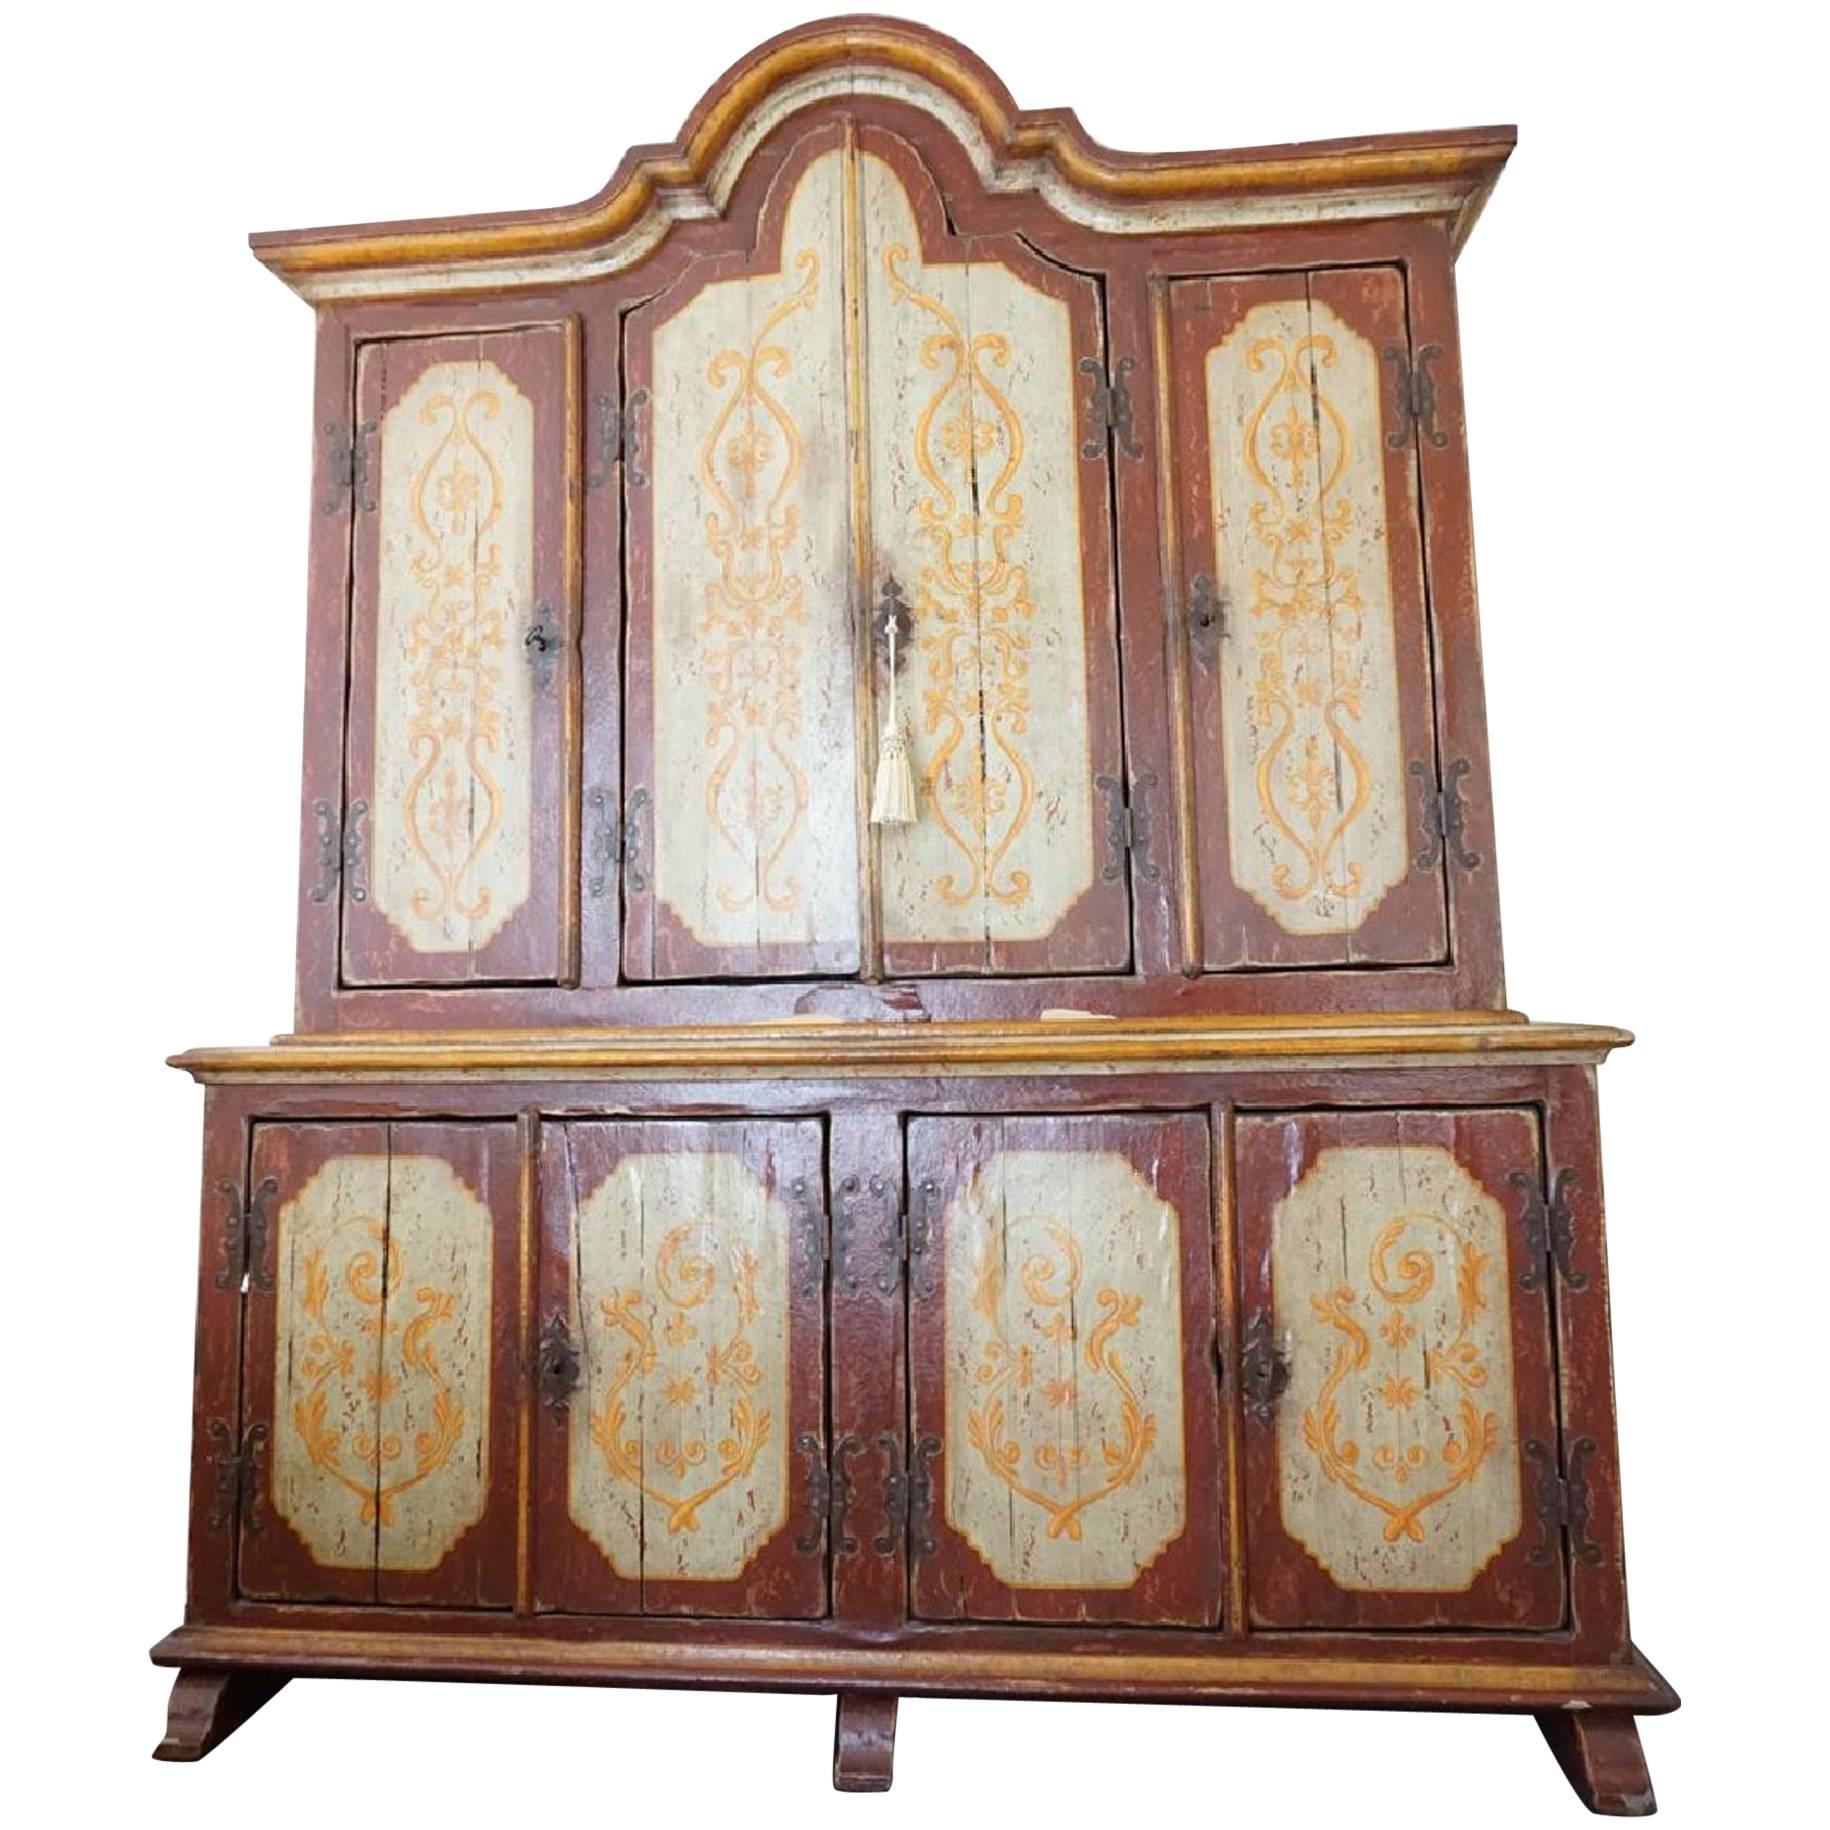 Late 18th Century Tyrolean Tall Cabinet